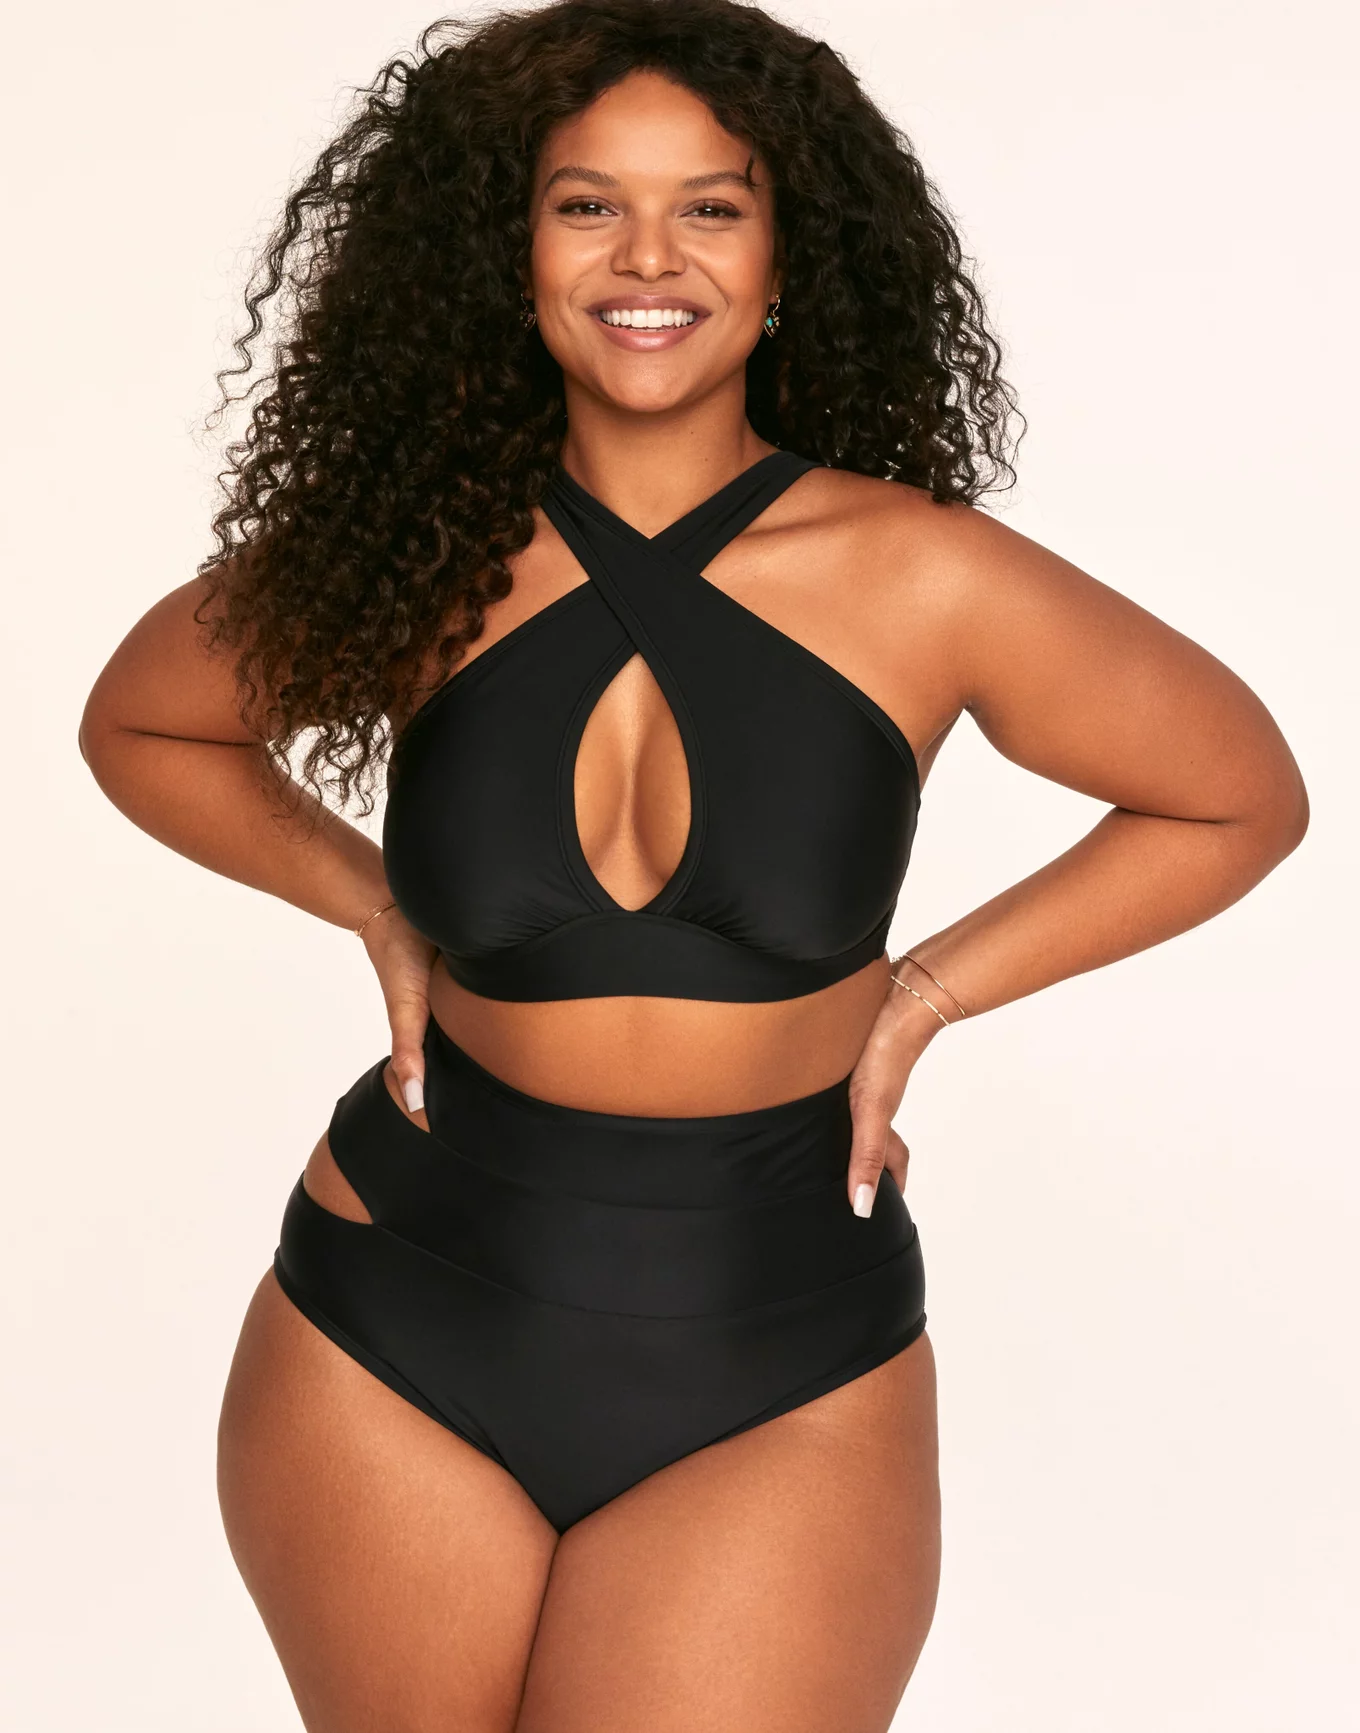 Women's Bathing Suits Plus Size Top Large Cup With High Waisted Bottom  Bikini Set Swimwear Swimsuit 